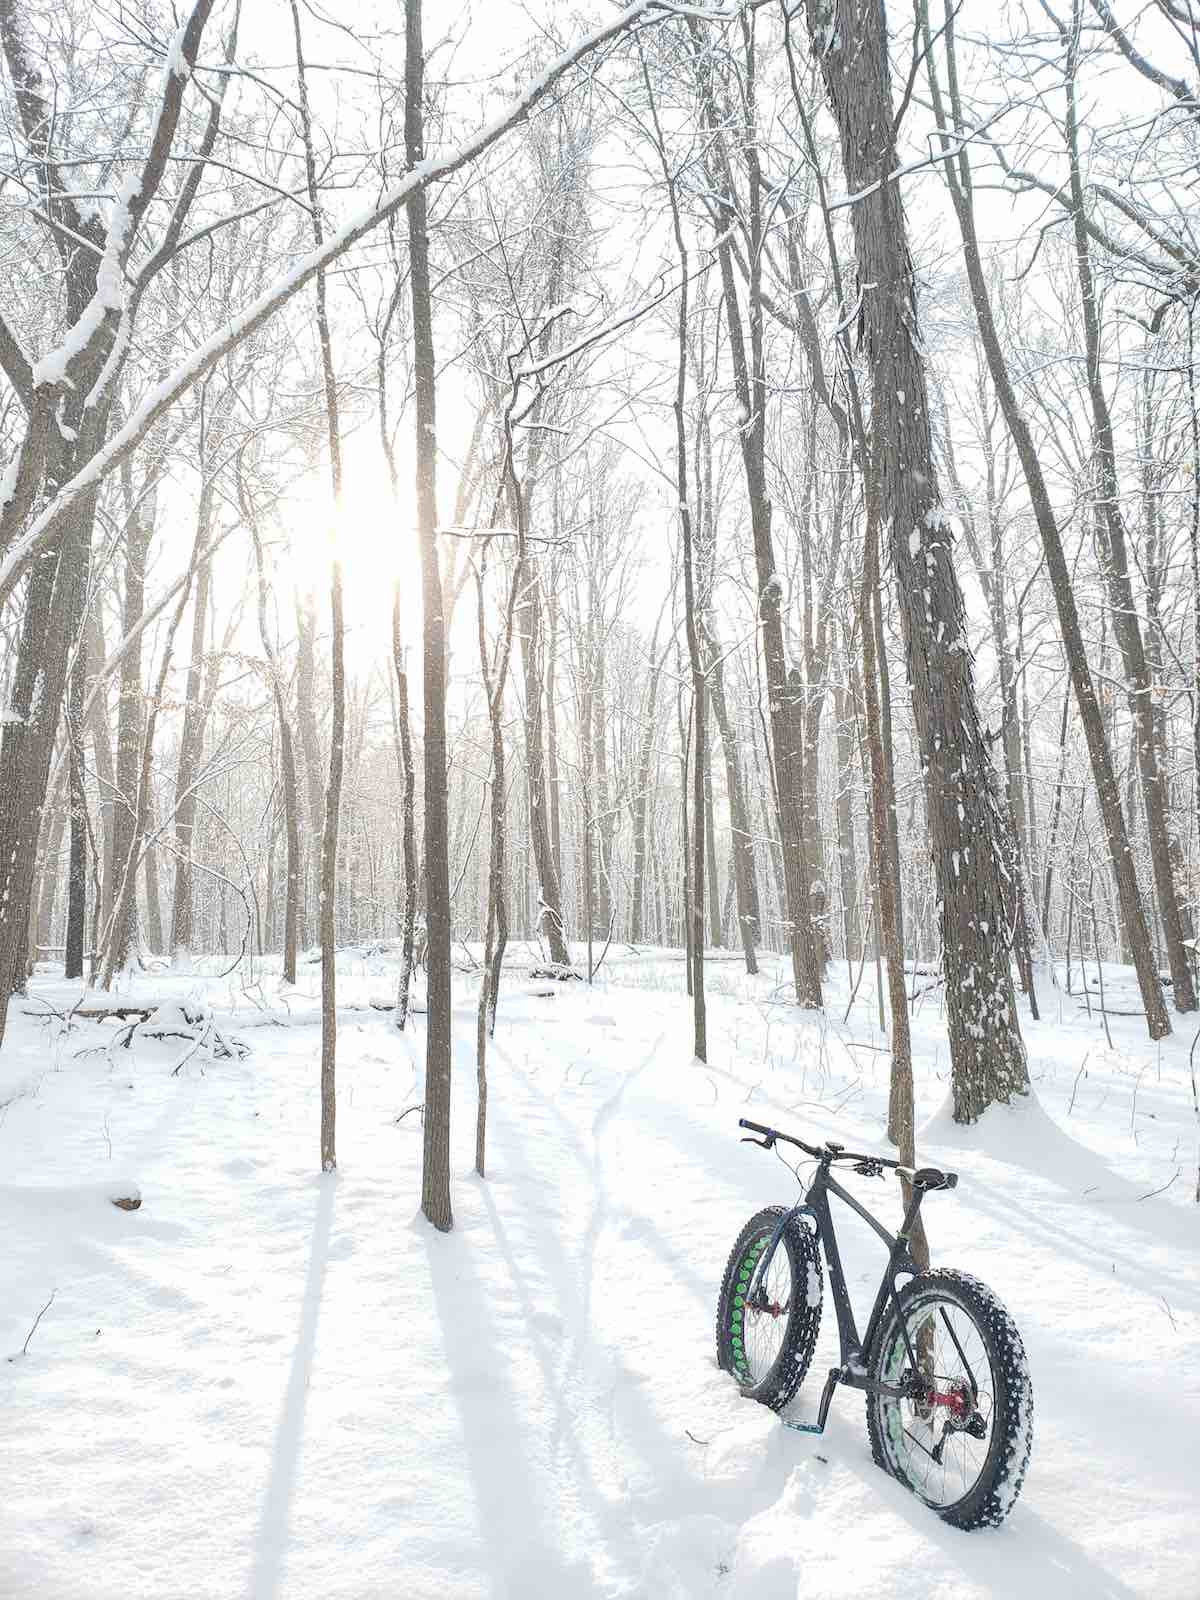 bikerumor pic of the day fat bike in the snow in the woods surrounded by bare trees and winter sun glowing in the background.